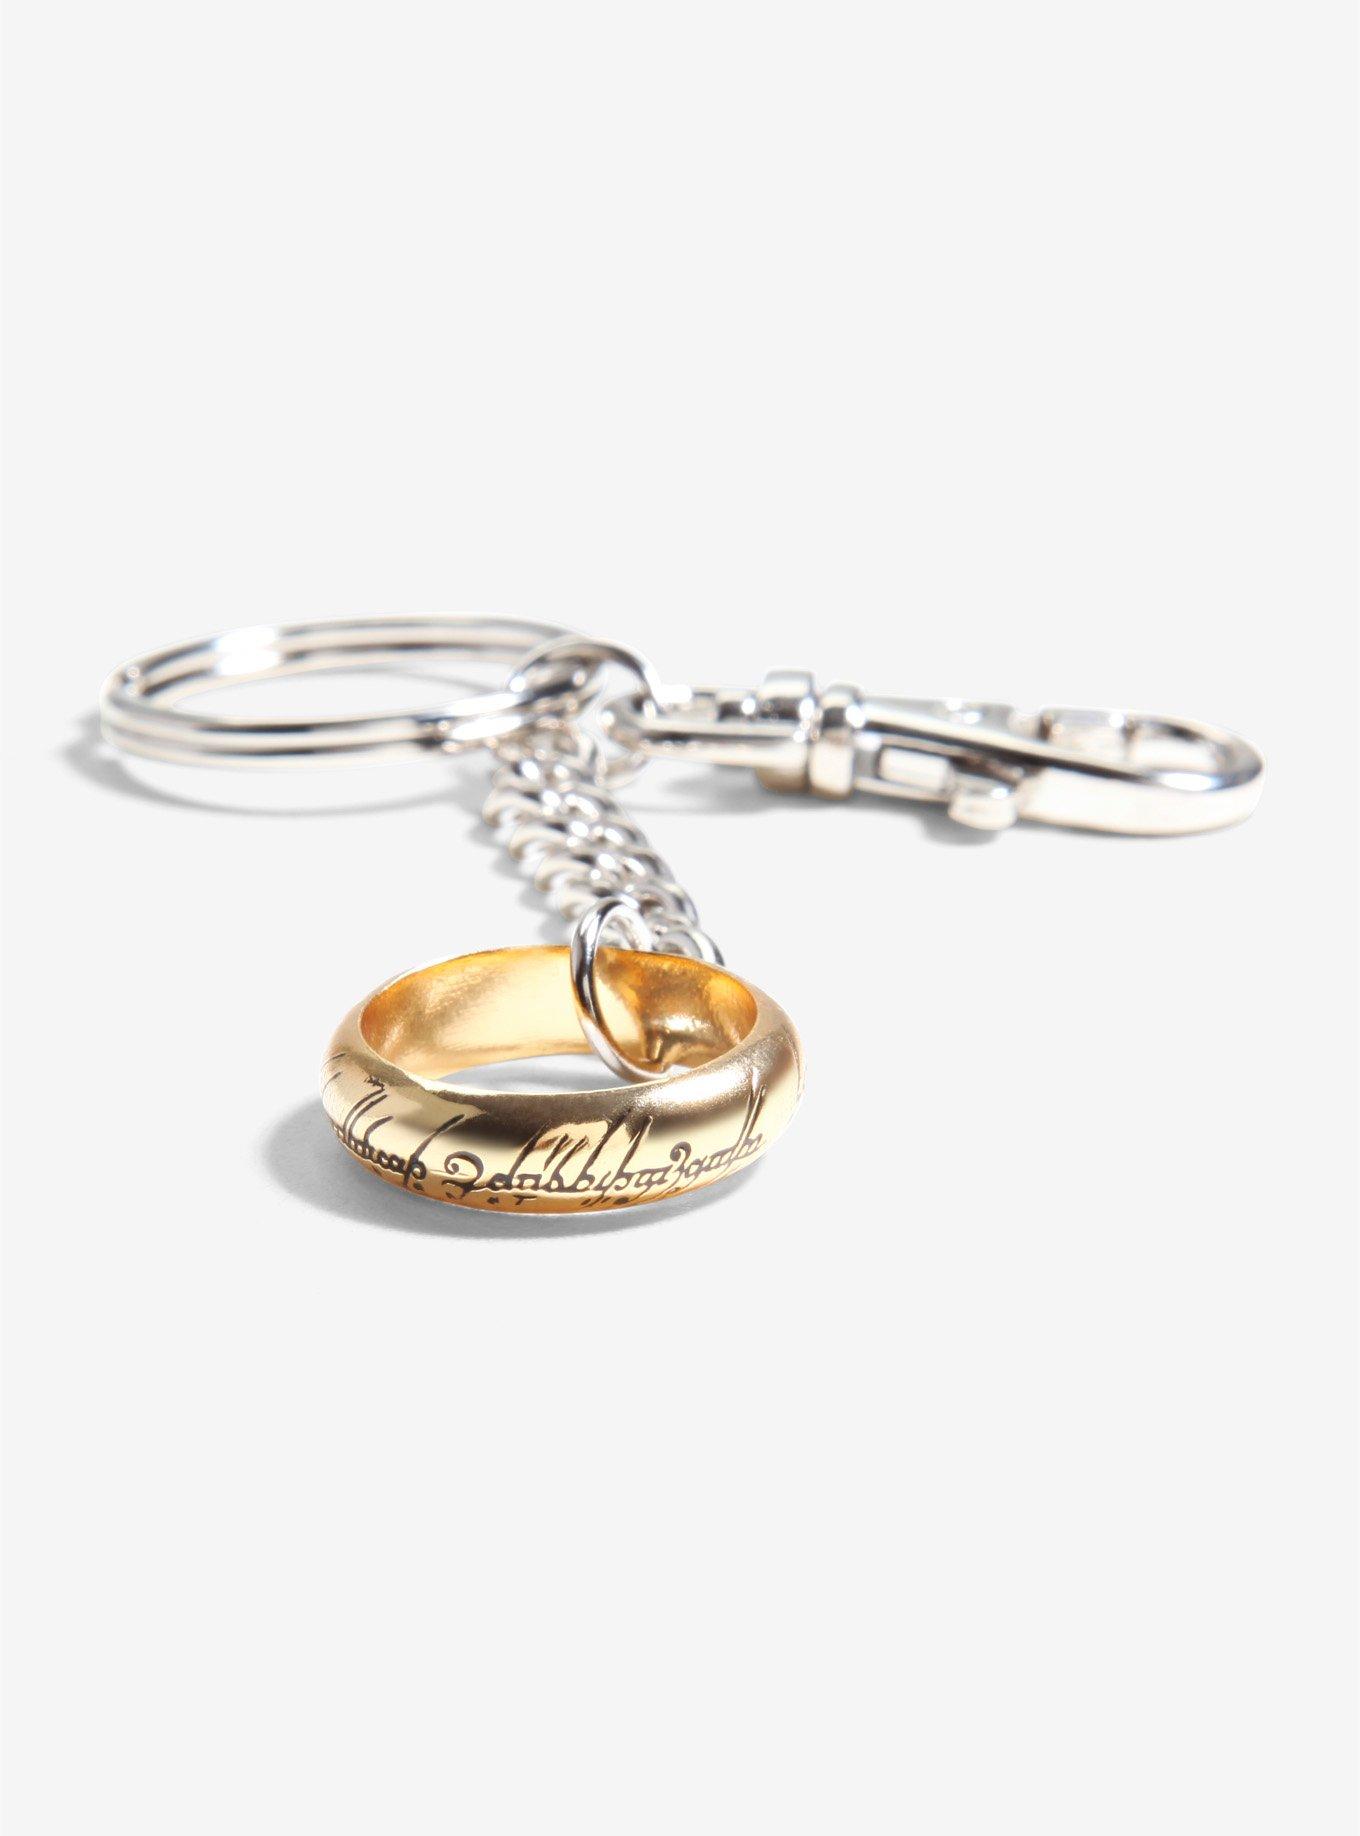 Lord of the Rings Keychain - The One Ring - 24h delivery